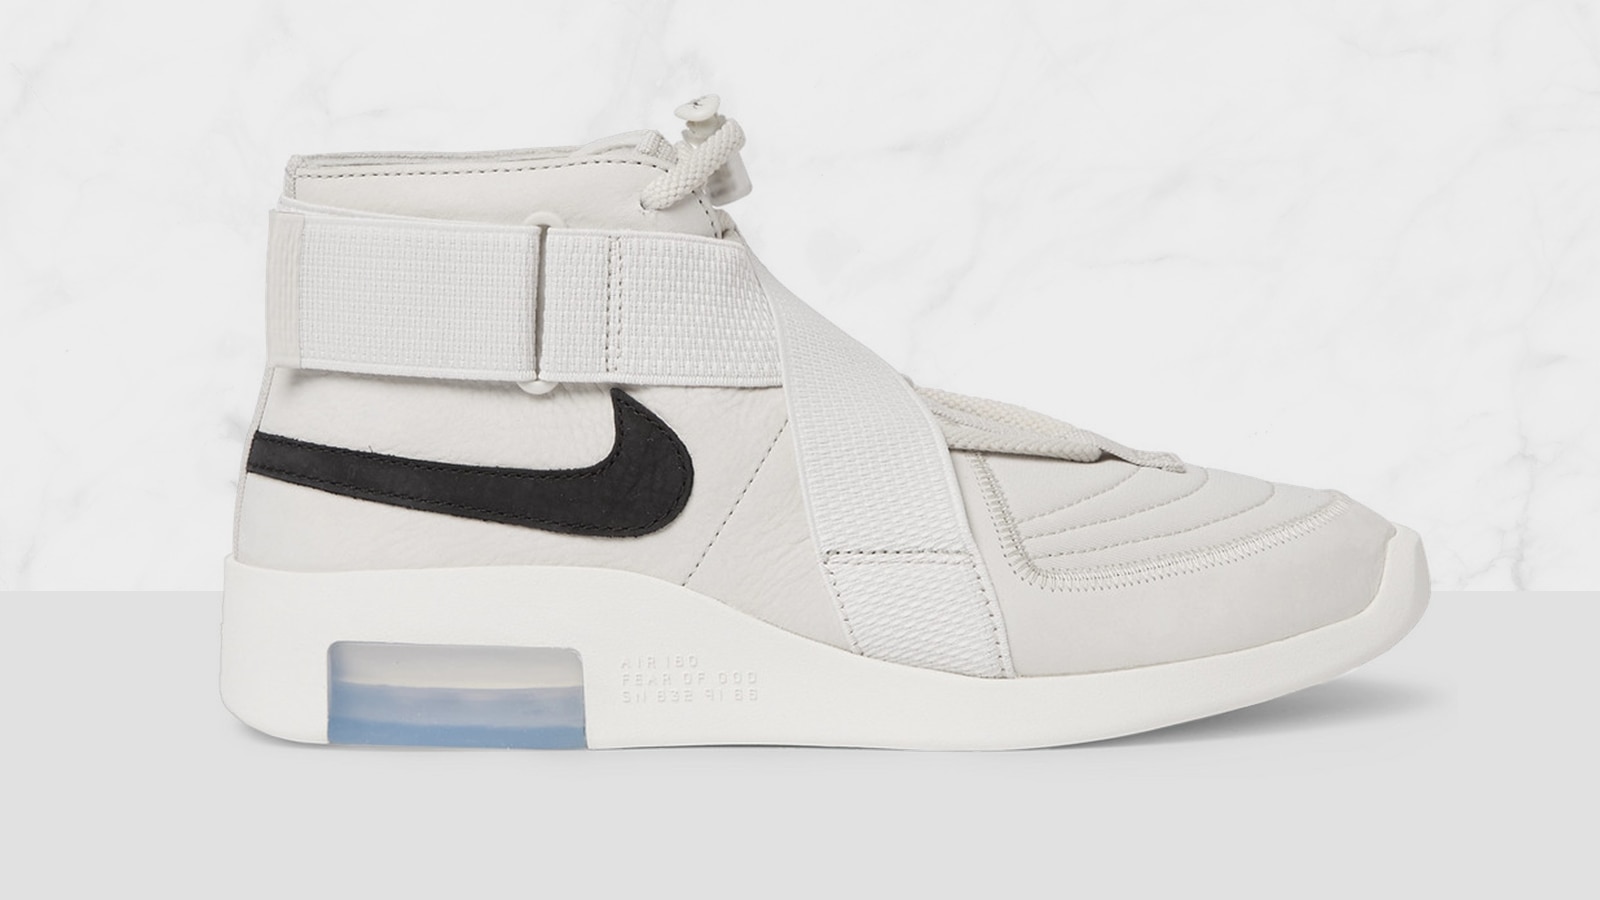 The Second Coming Of Nike X Fear Of God | The Journal | MR PORTER